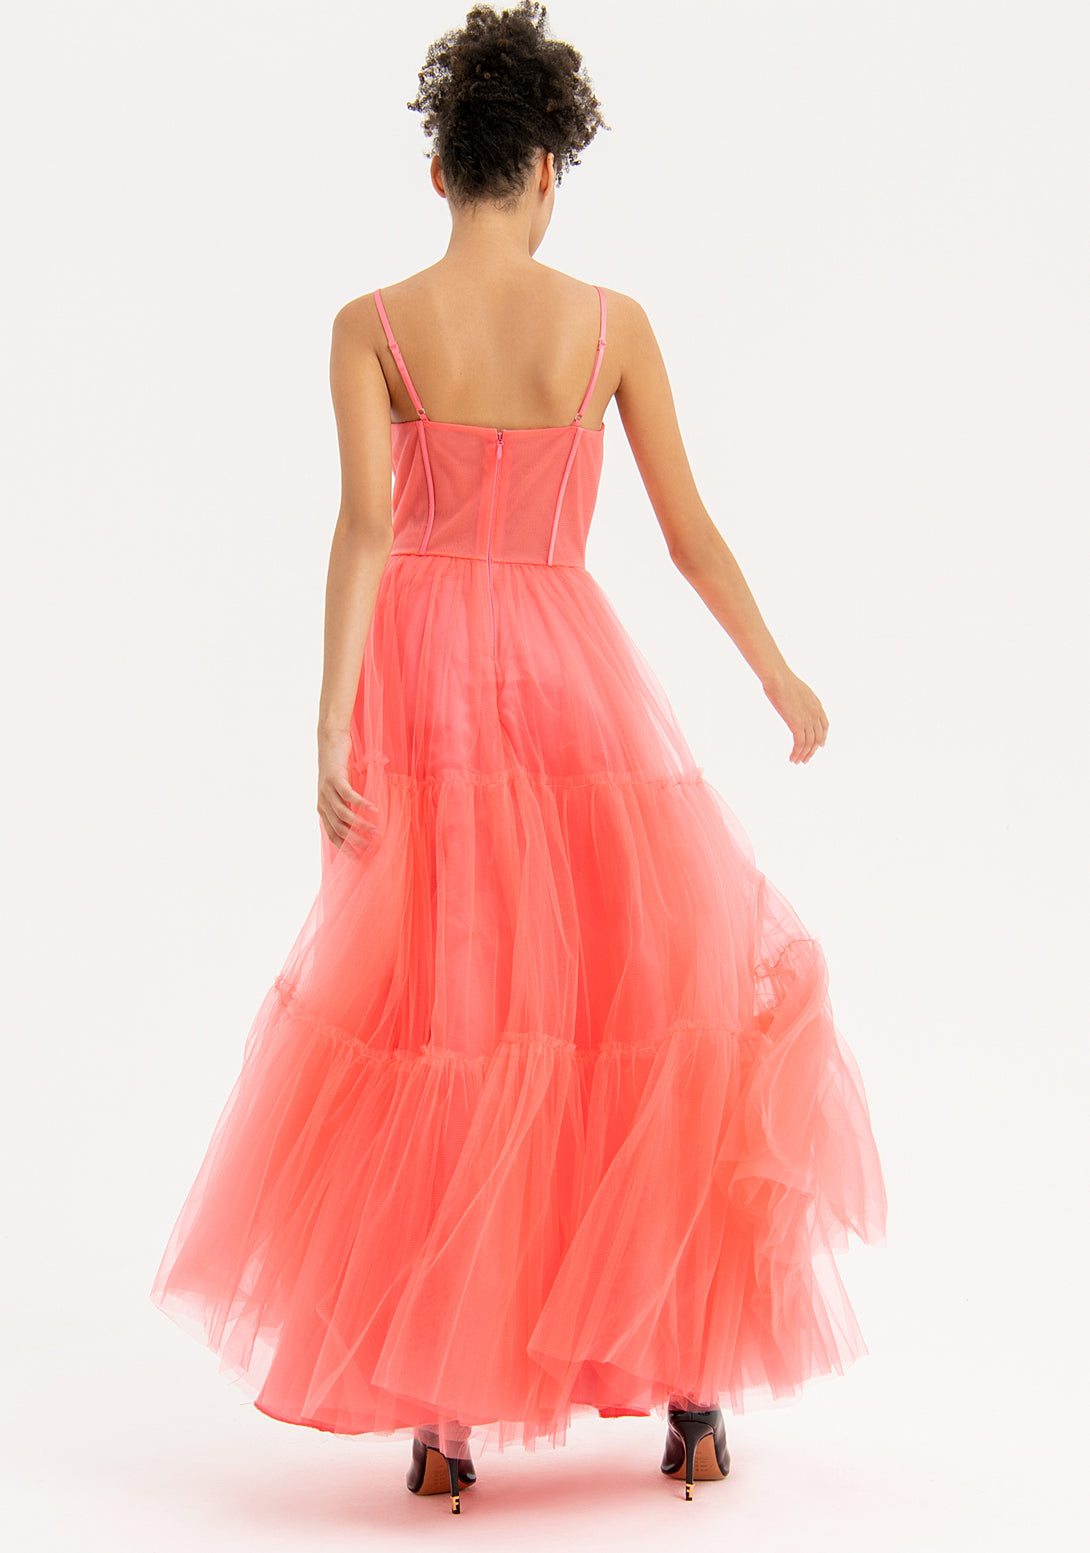 Long tulle dress with coral bodice